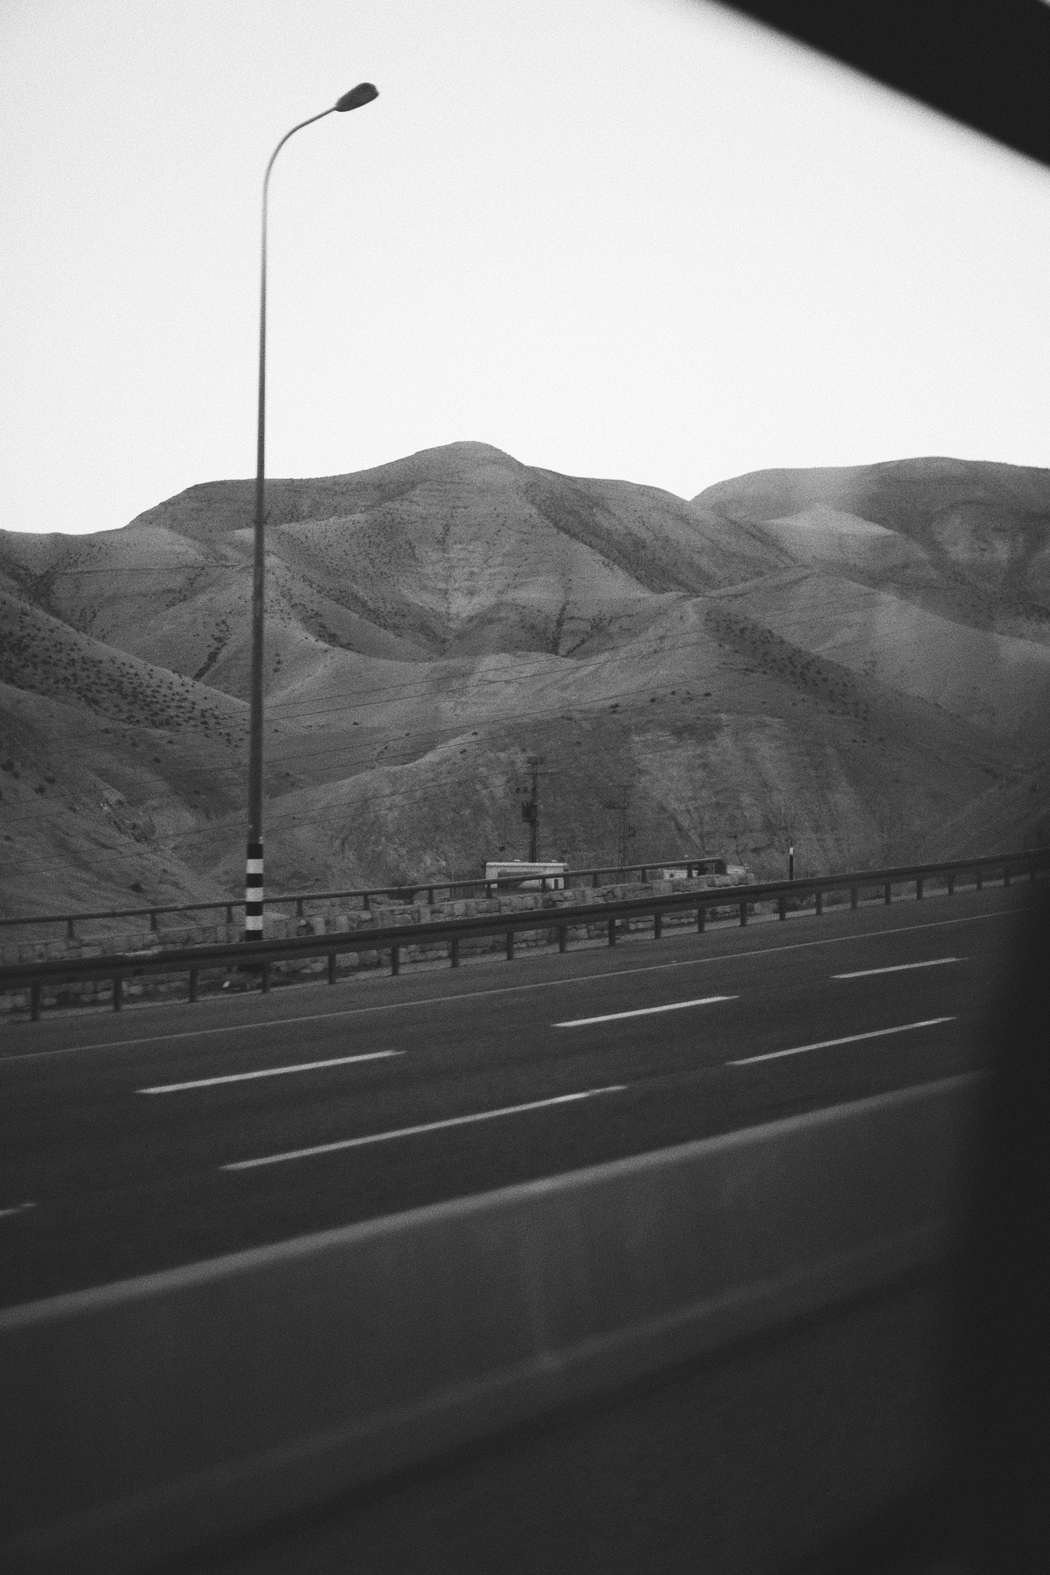 A Visual Story - Shot by Fiona Dinkelbach - Road to Dead Sea, Israel